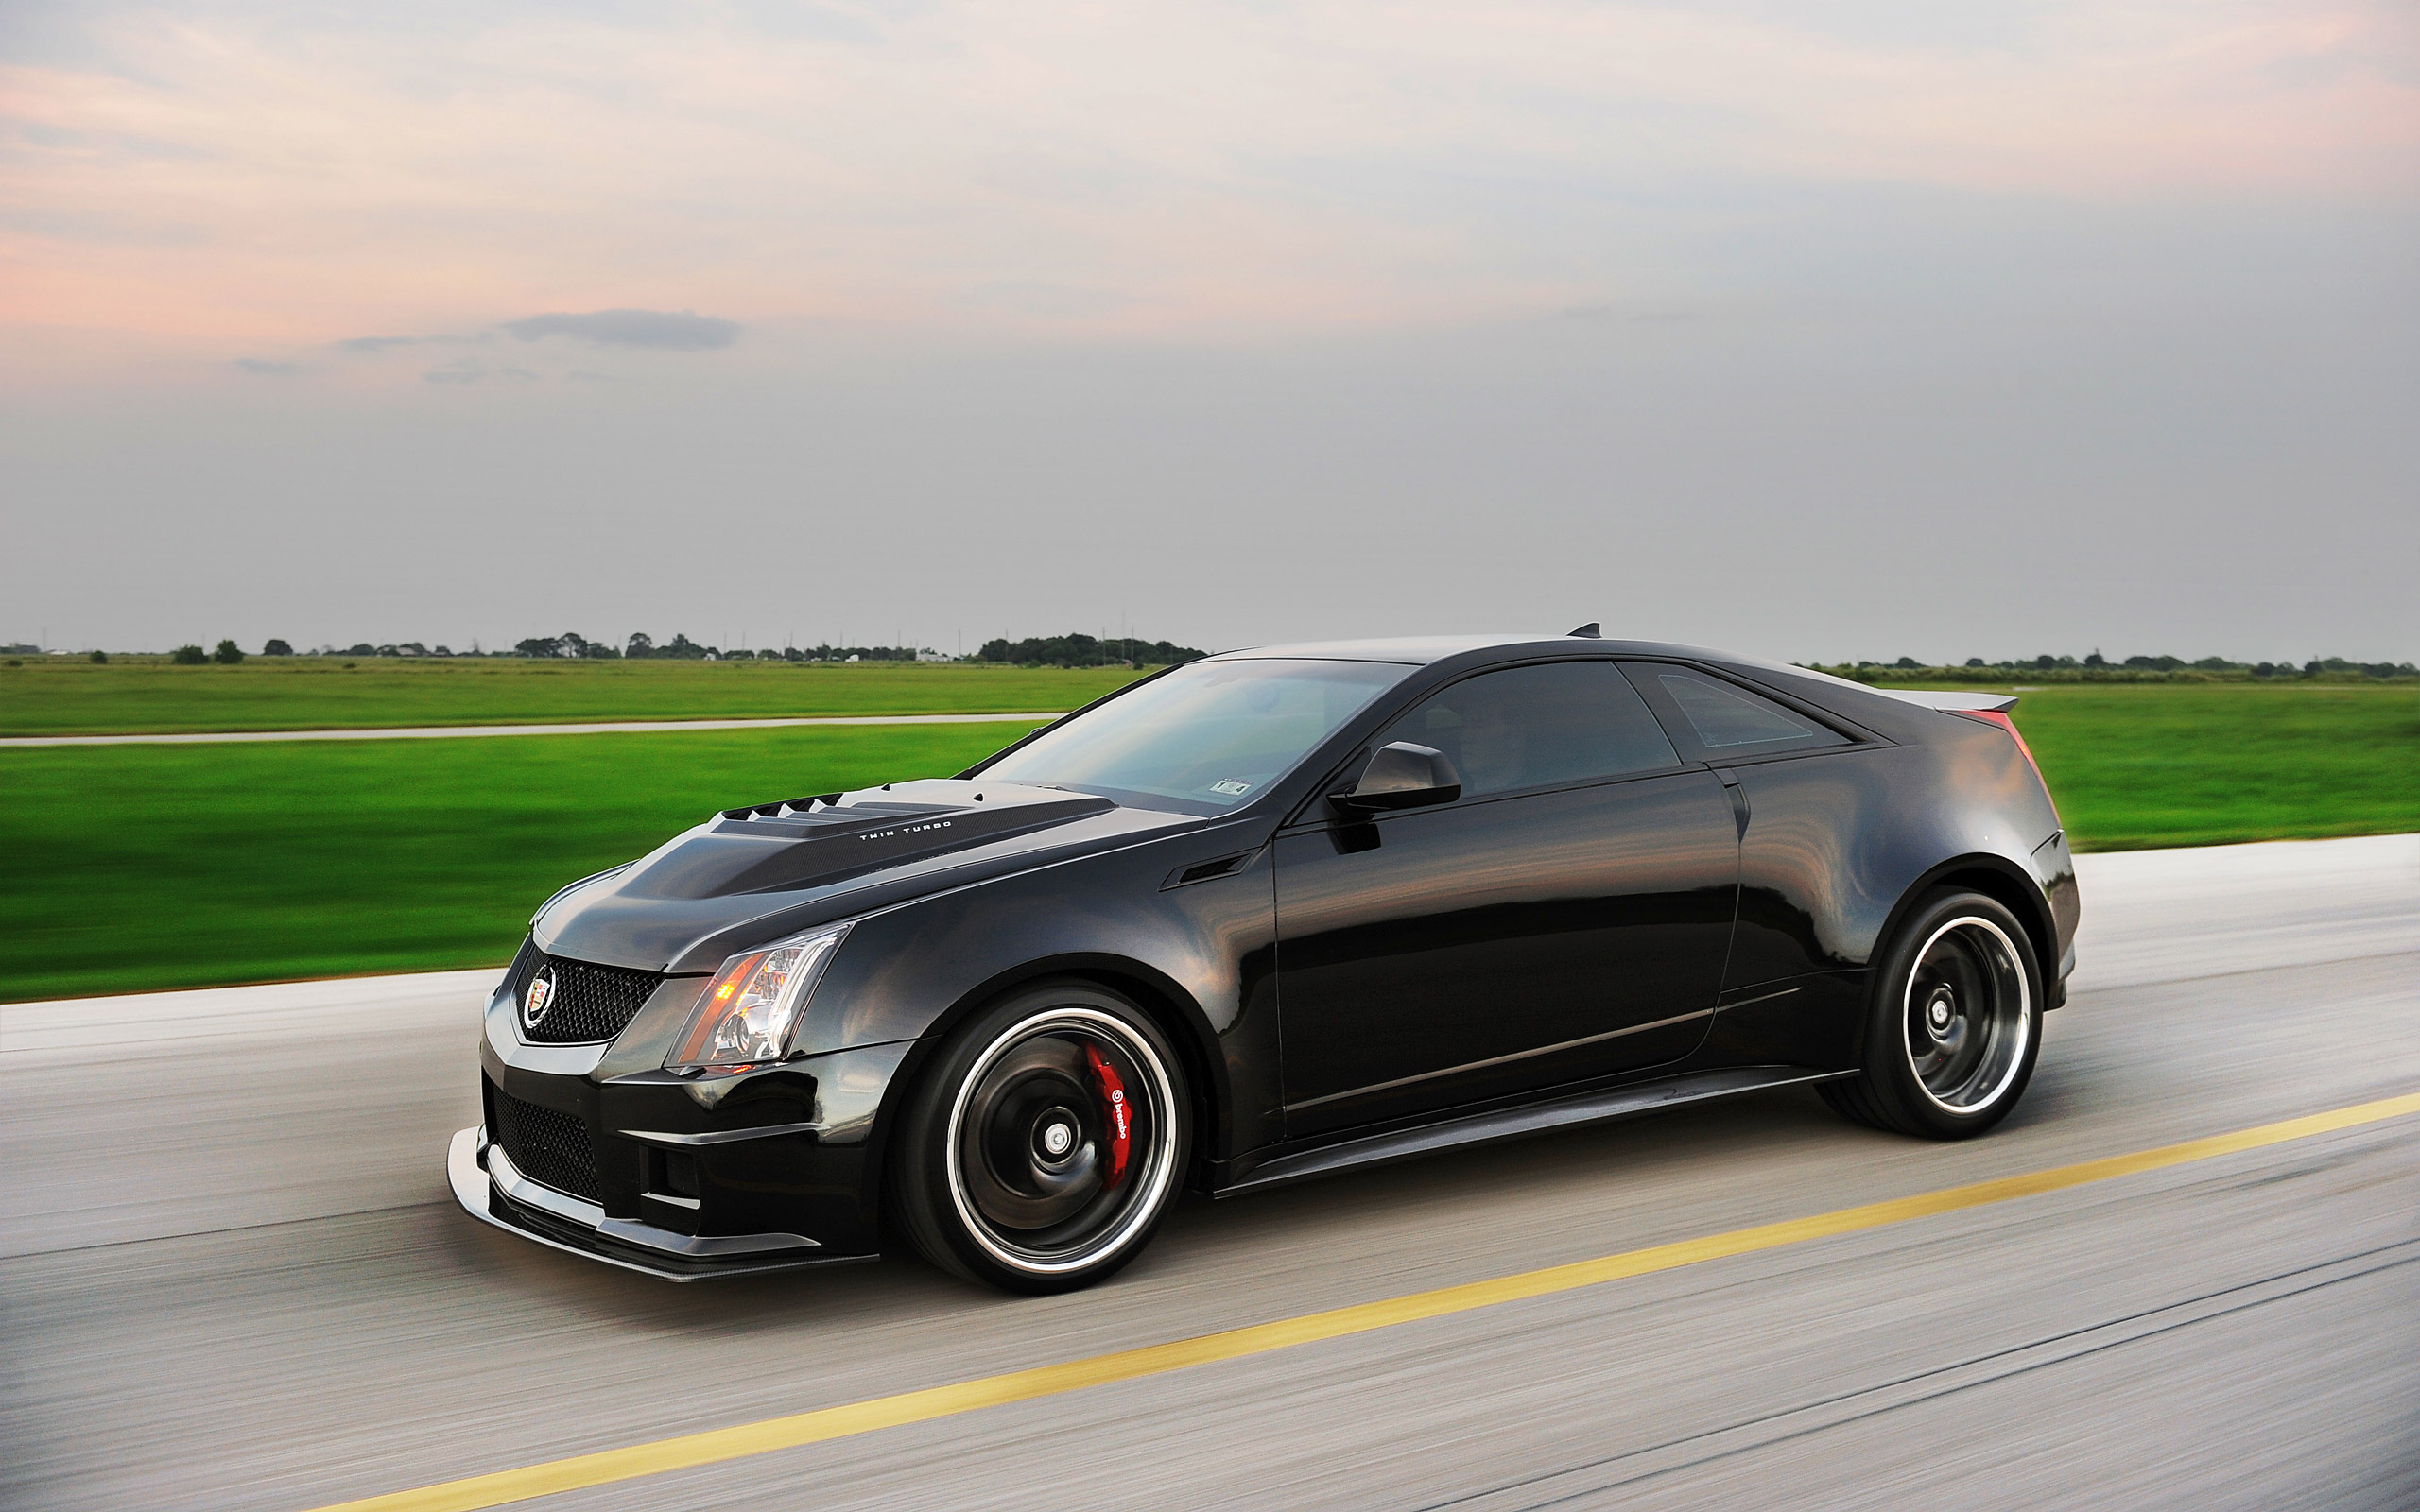  2012 Hennessey VR1200 Twin Turbo Coupe Wallpaper.